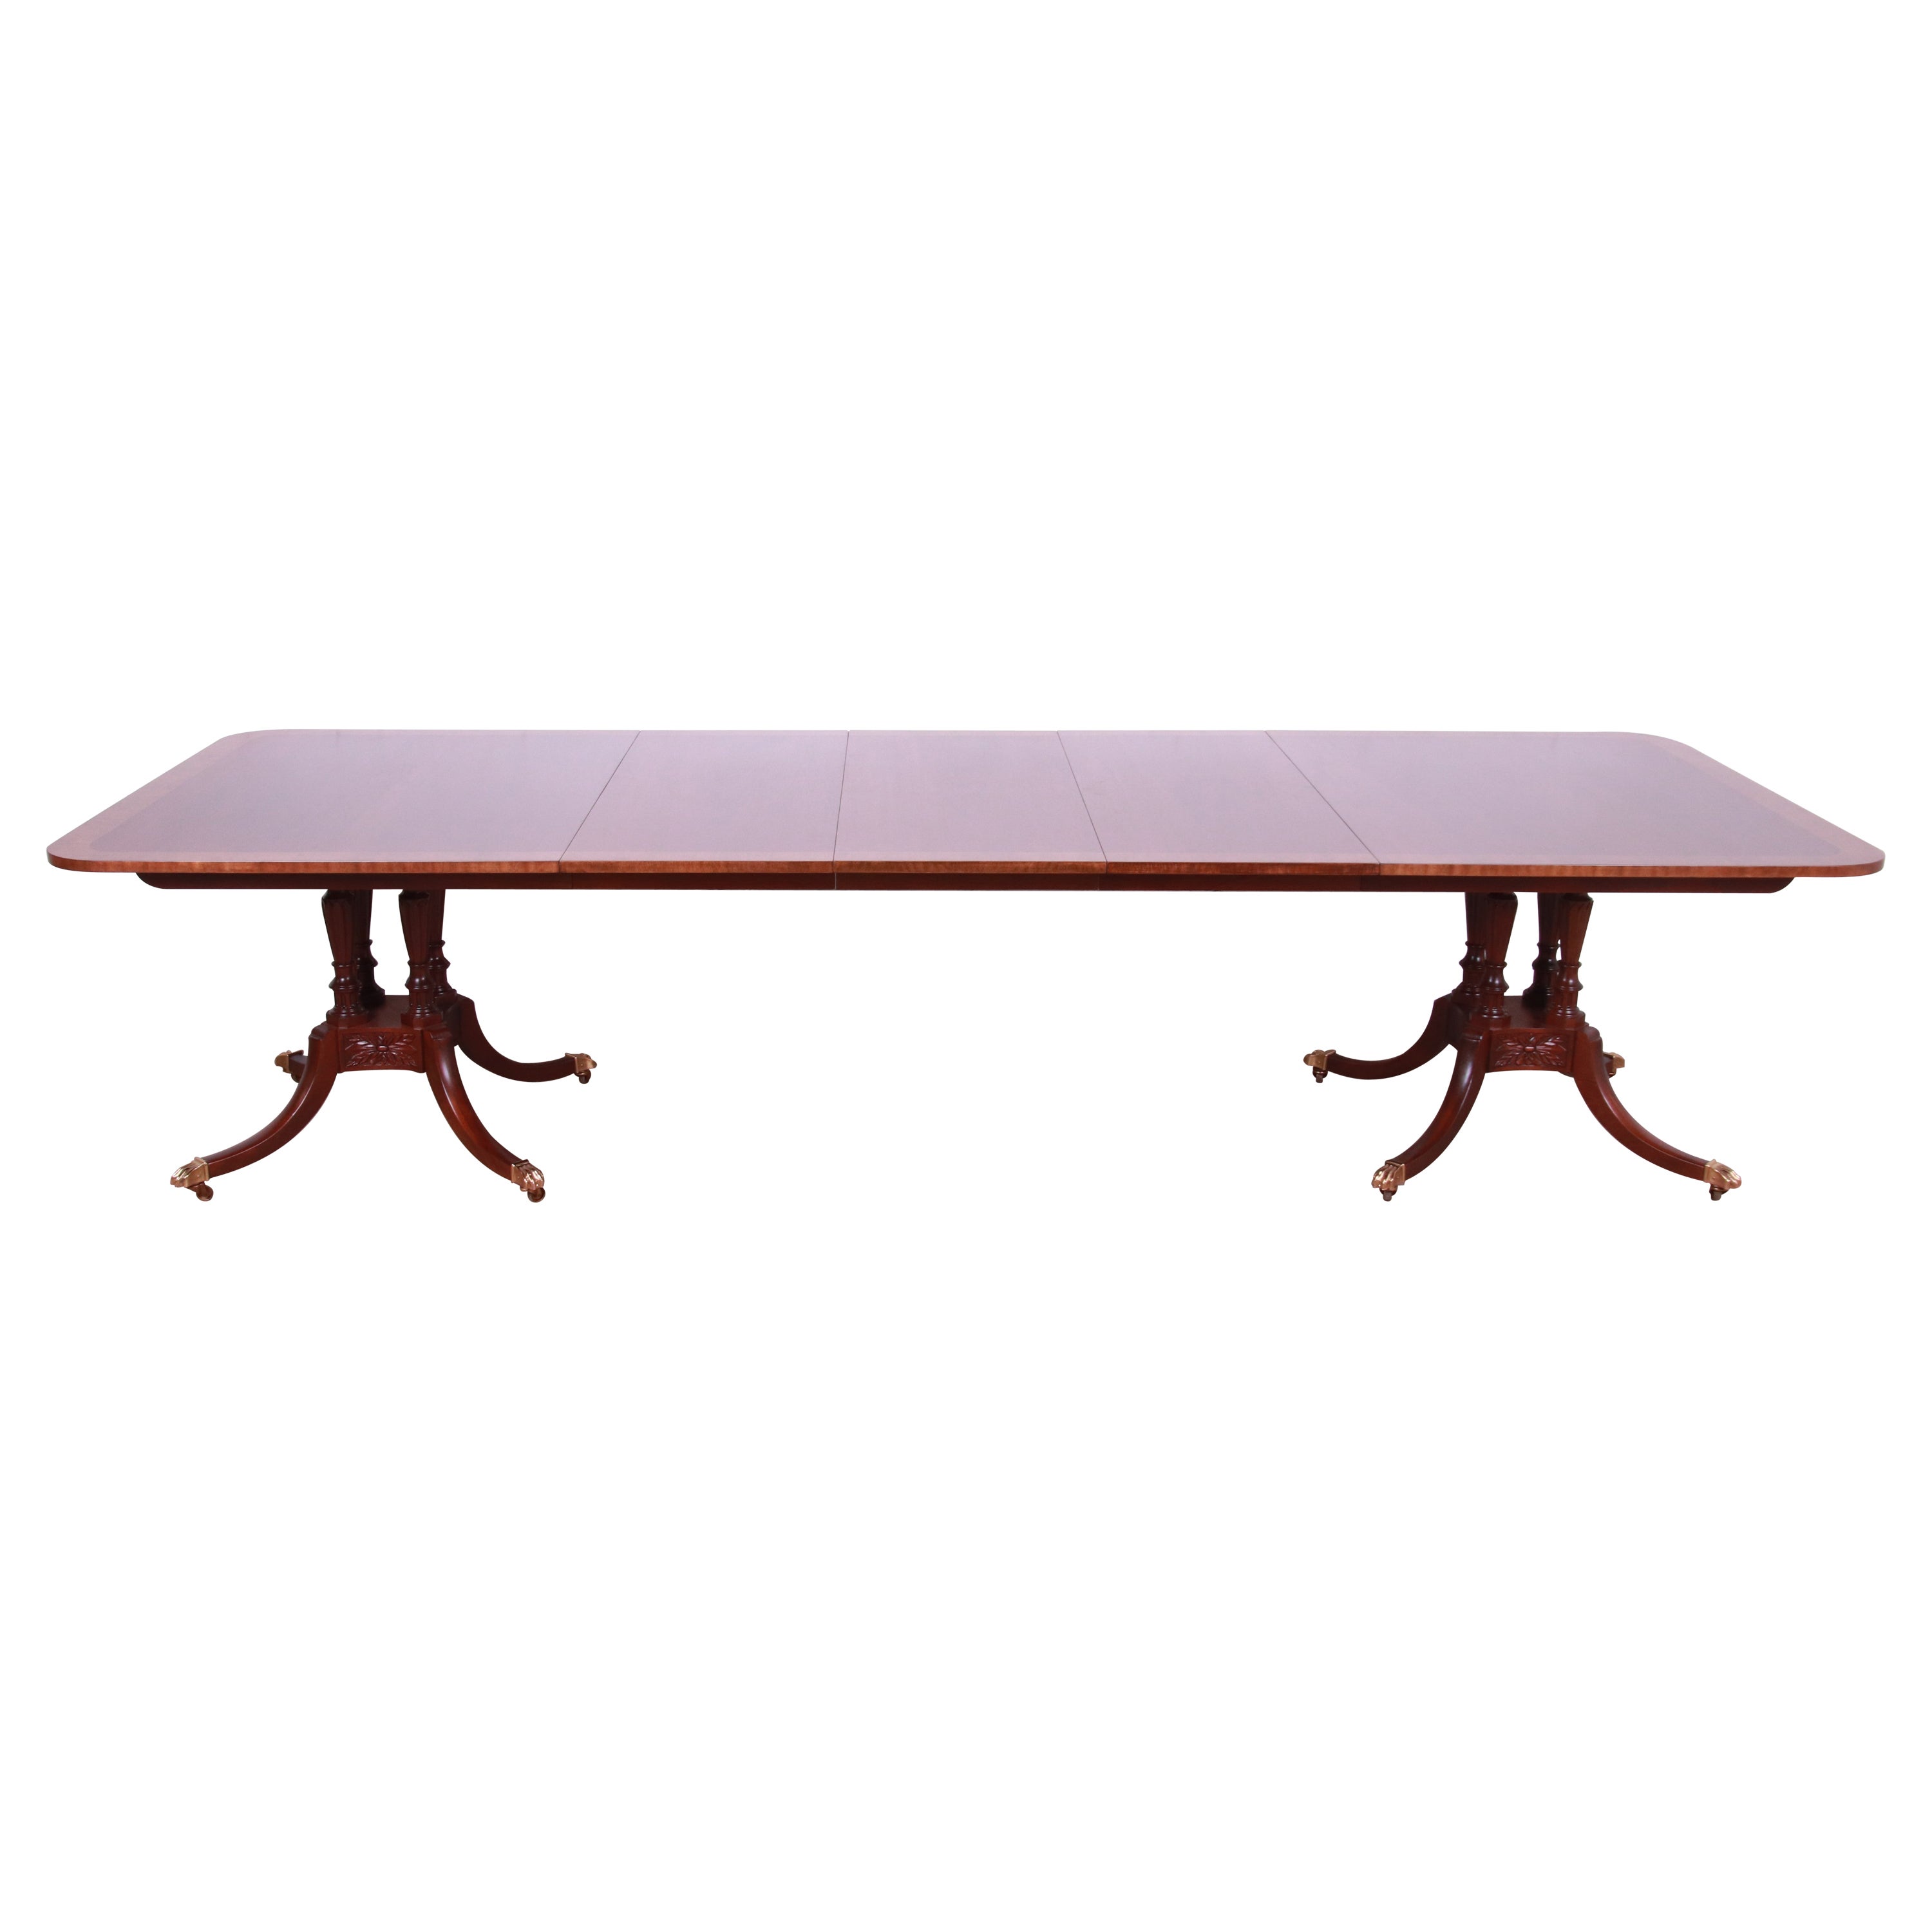 Baker Furniture Georgian Double Pedestal Extension Dining Table, Refinished